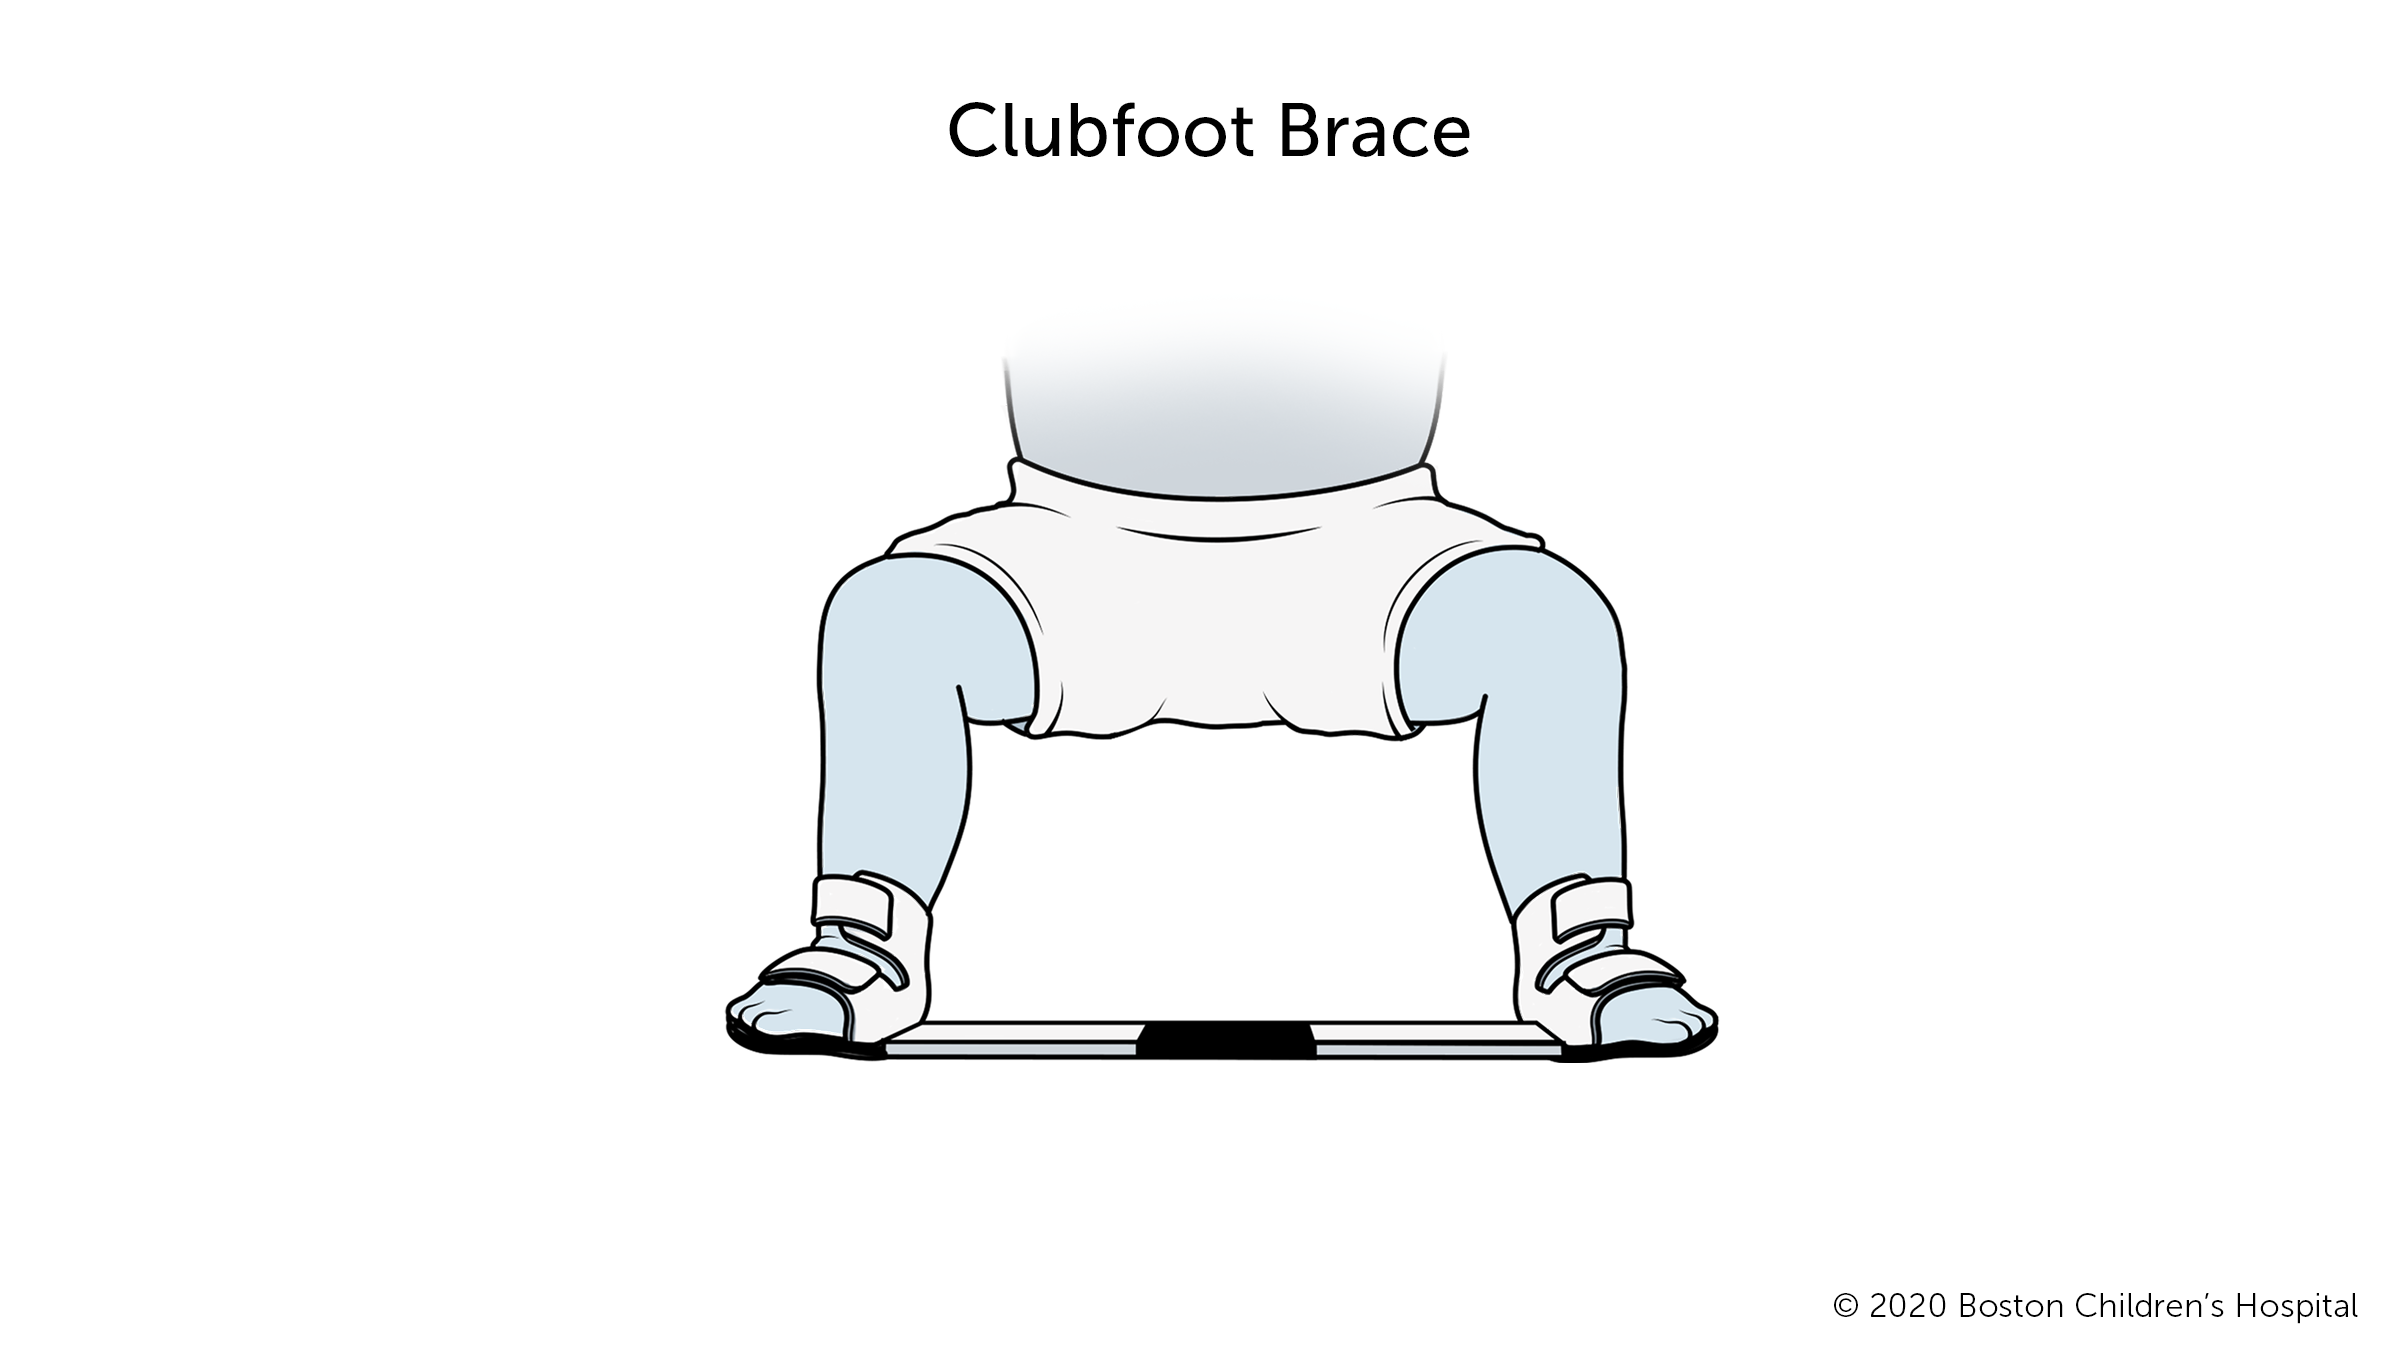 This is how a clubfoot brace works.